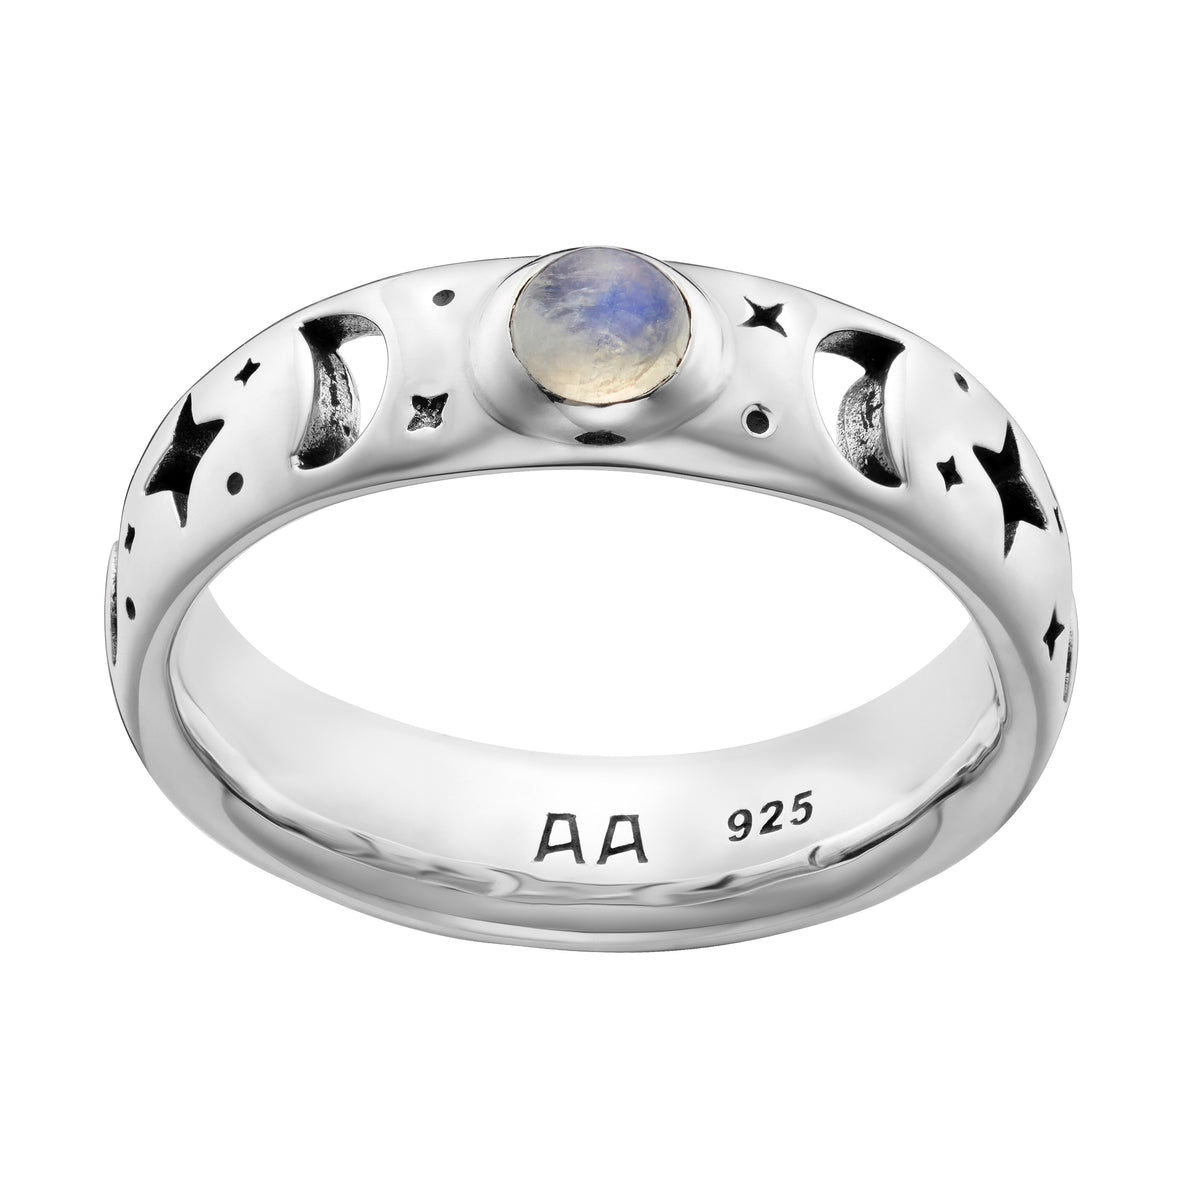 JUST A PHASE - Sterling Silver & Moonstone Ring